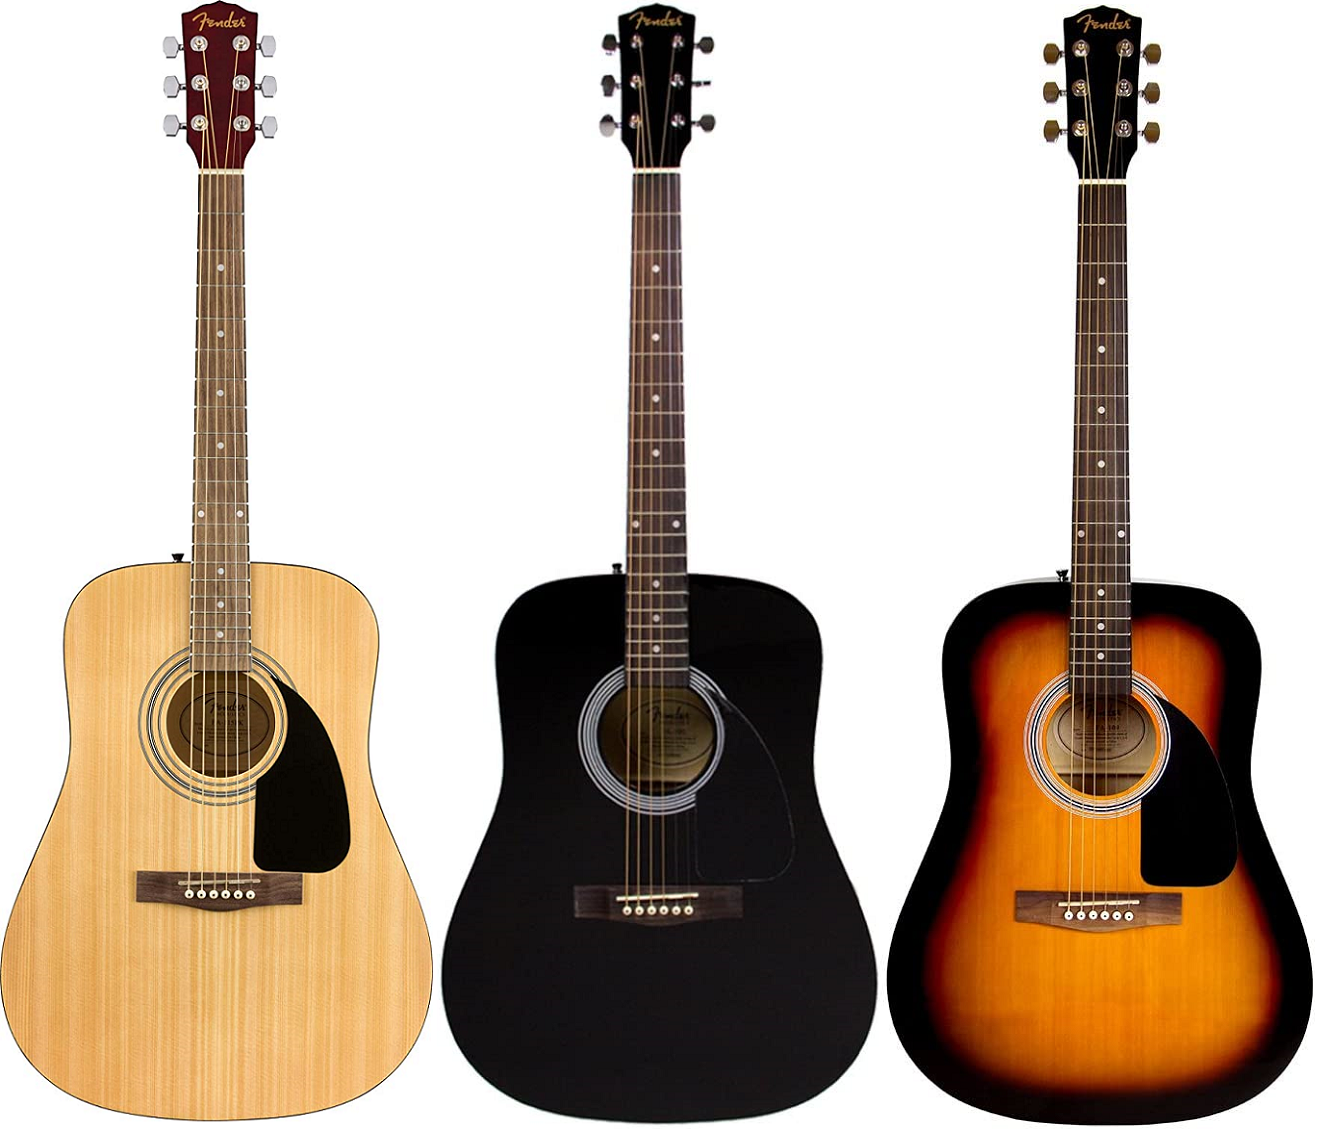 Fender FA-115 colors available